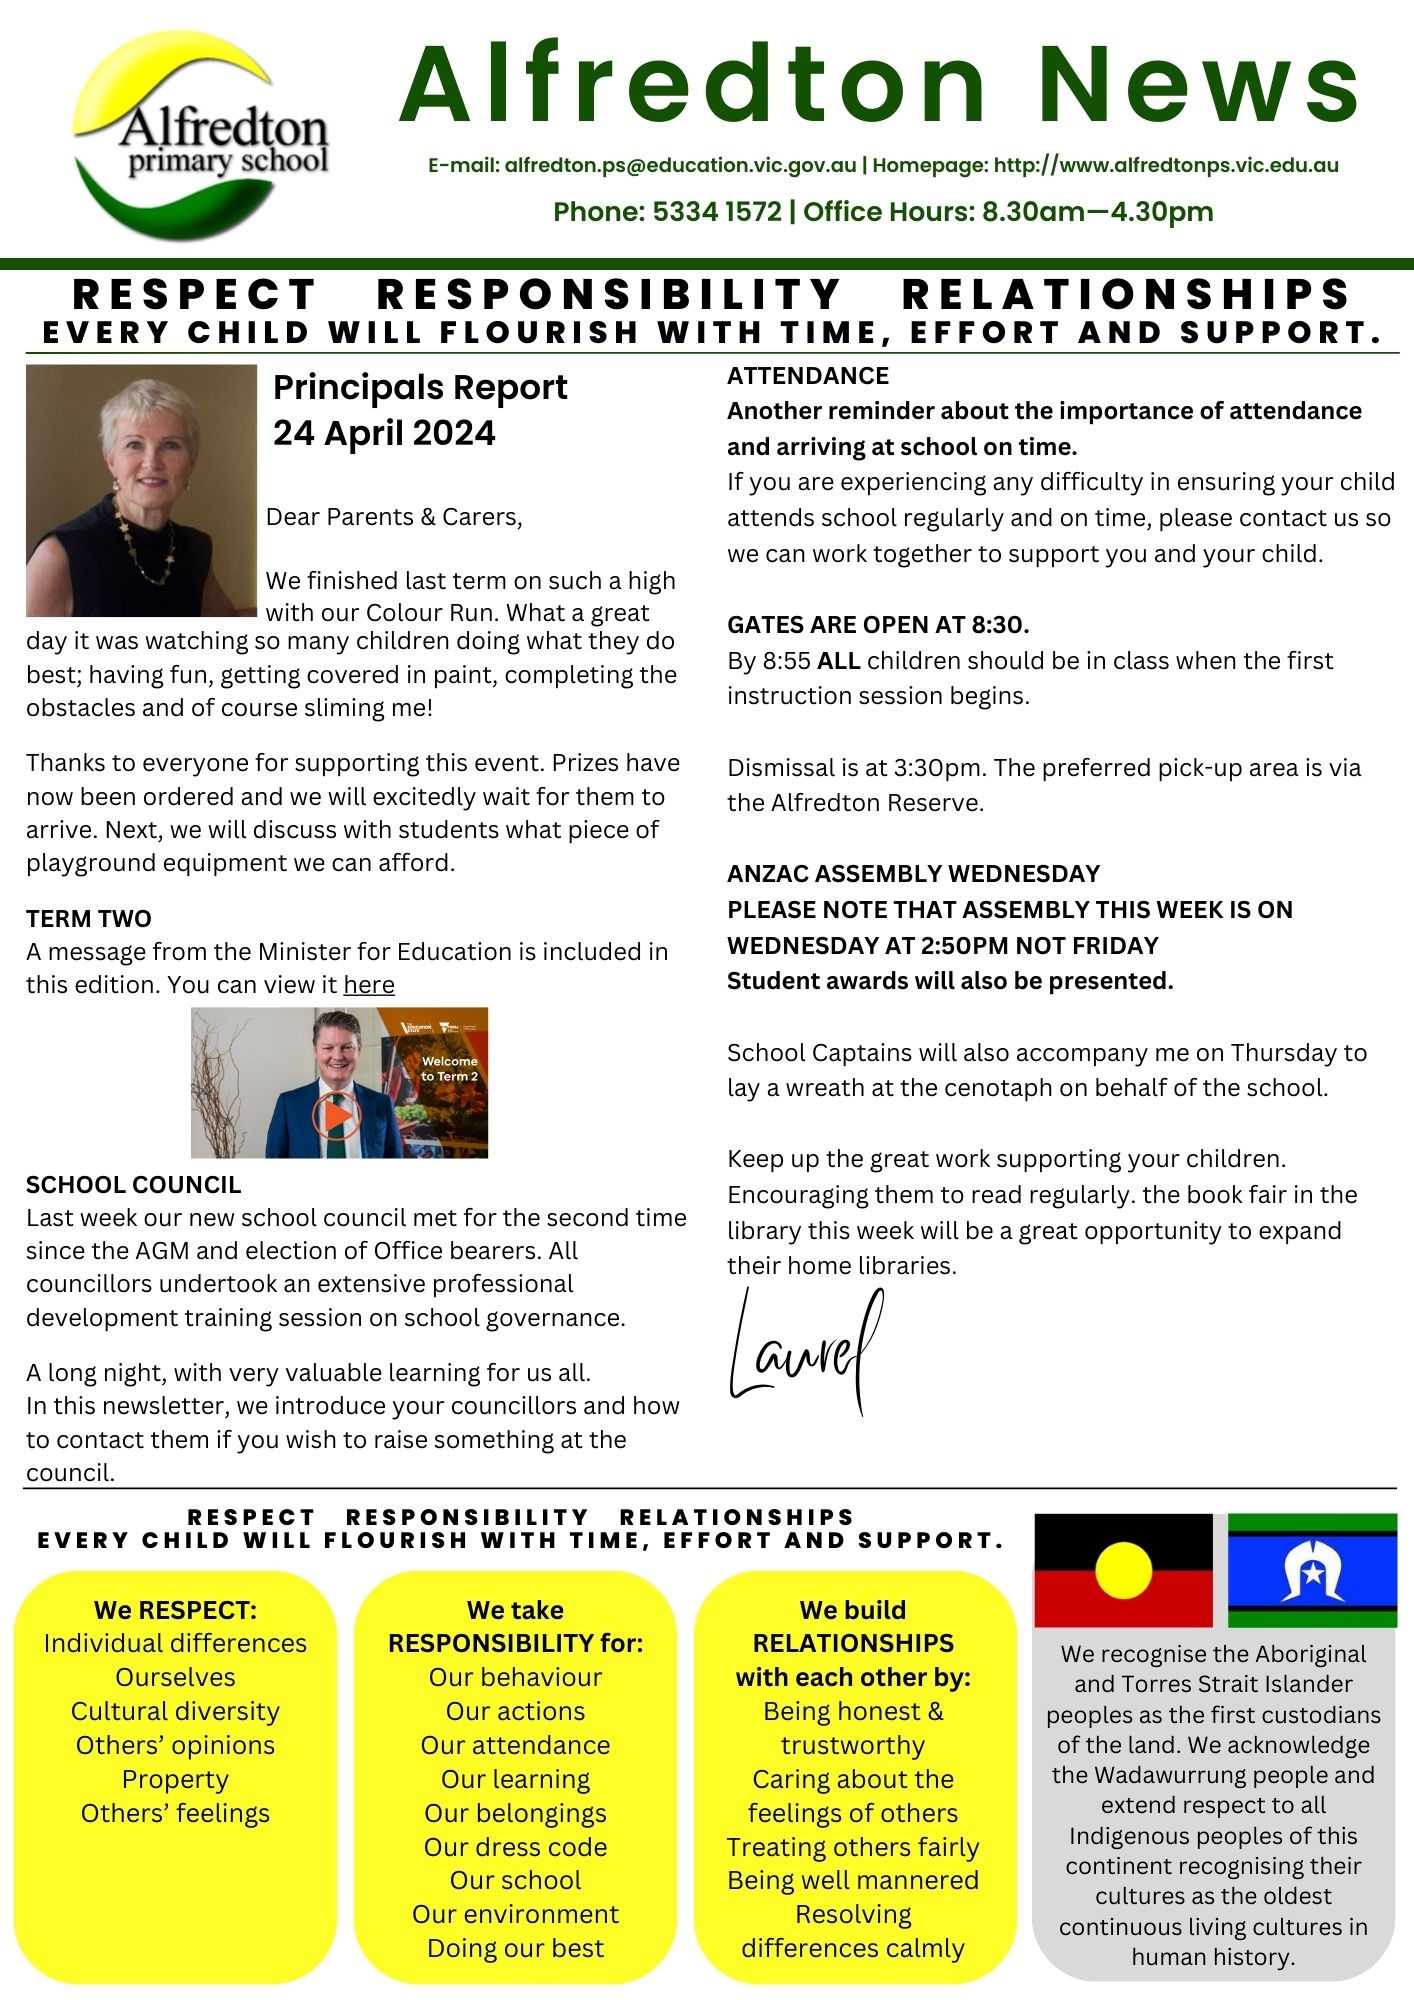 first page of the newsletter